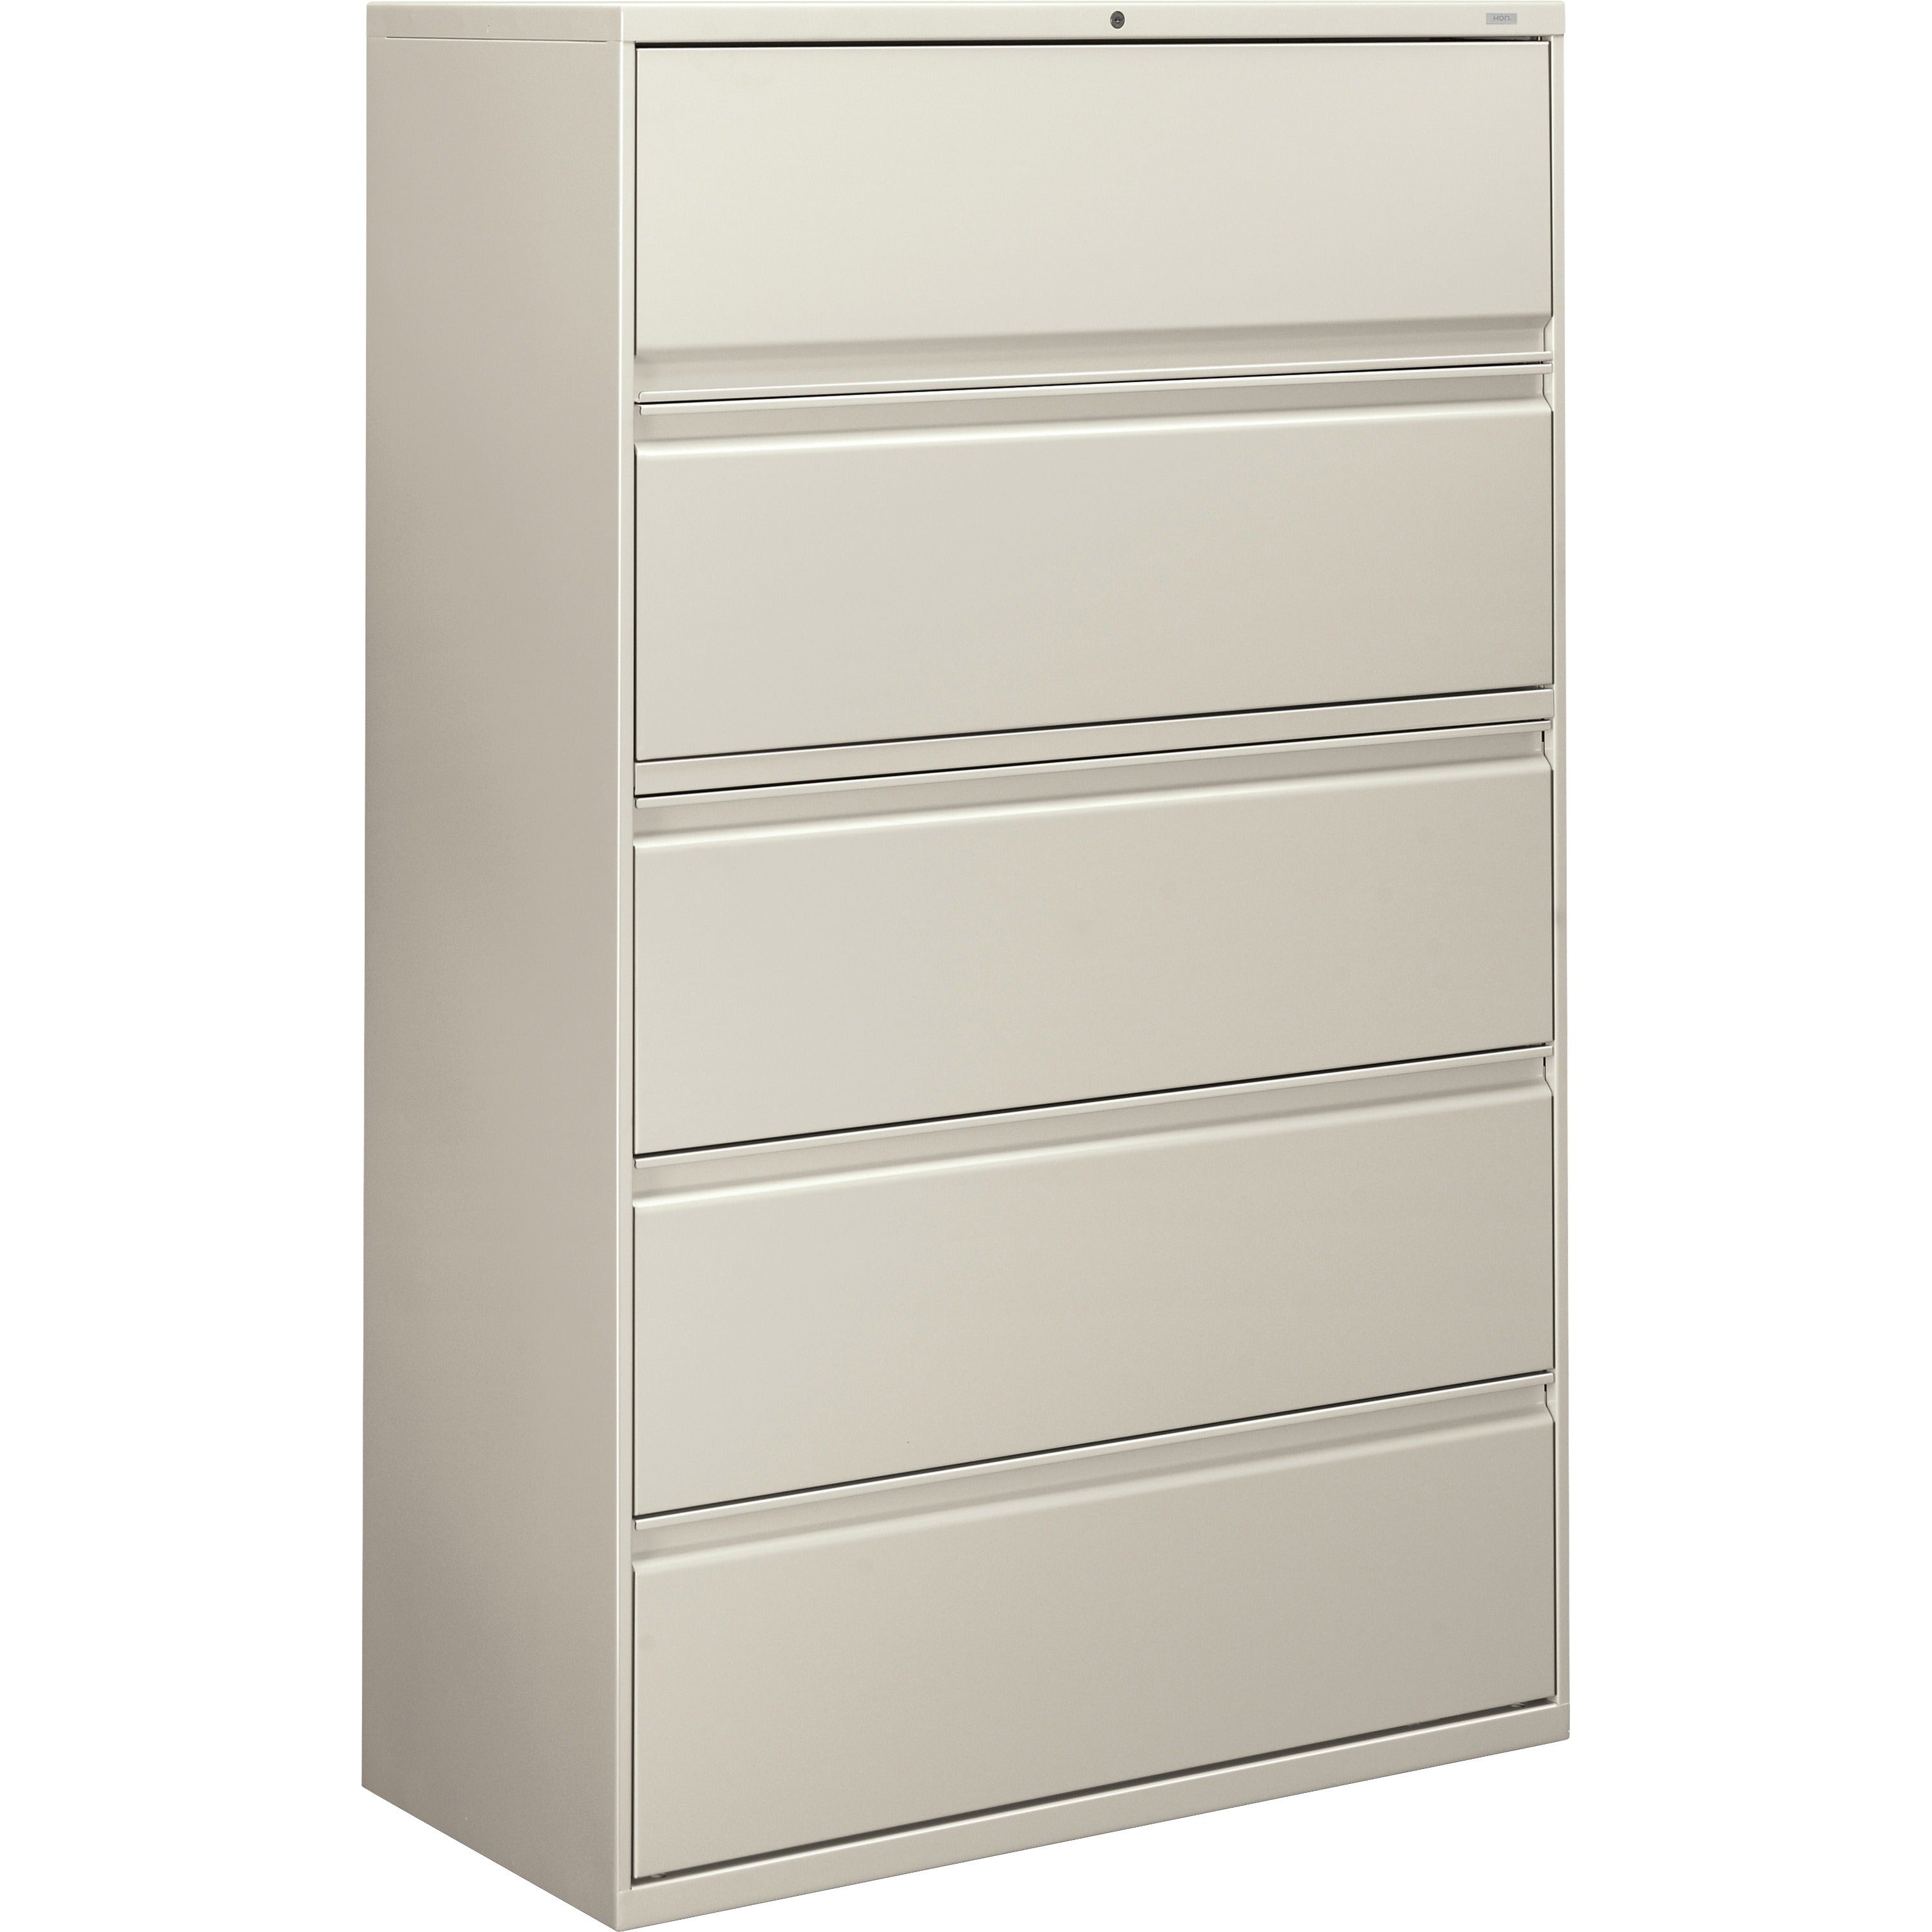 HON Brigade 800 H895 Lateral File - 42" x 18"67" - 5 Drawer(s) - Finish: Light Gray - 